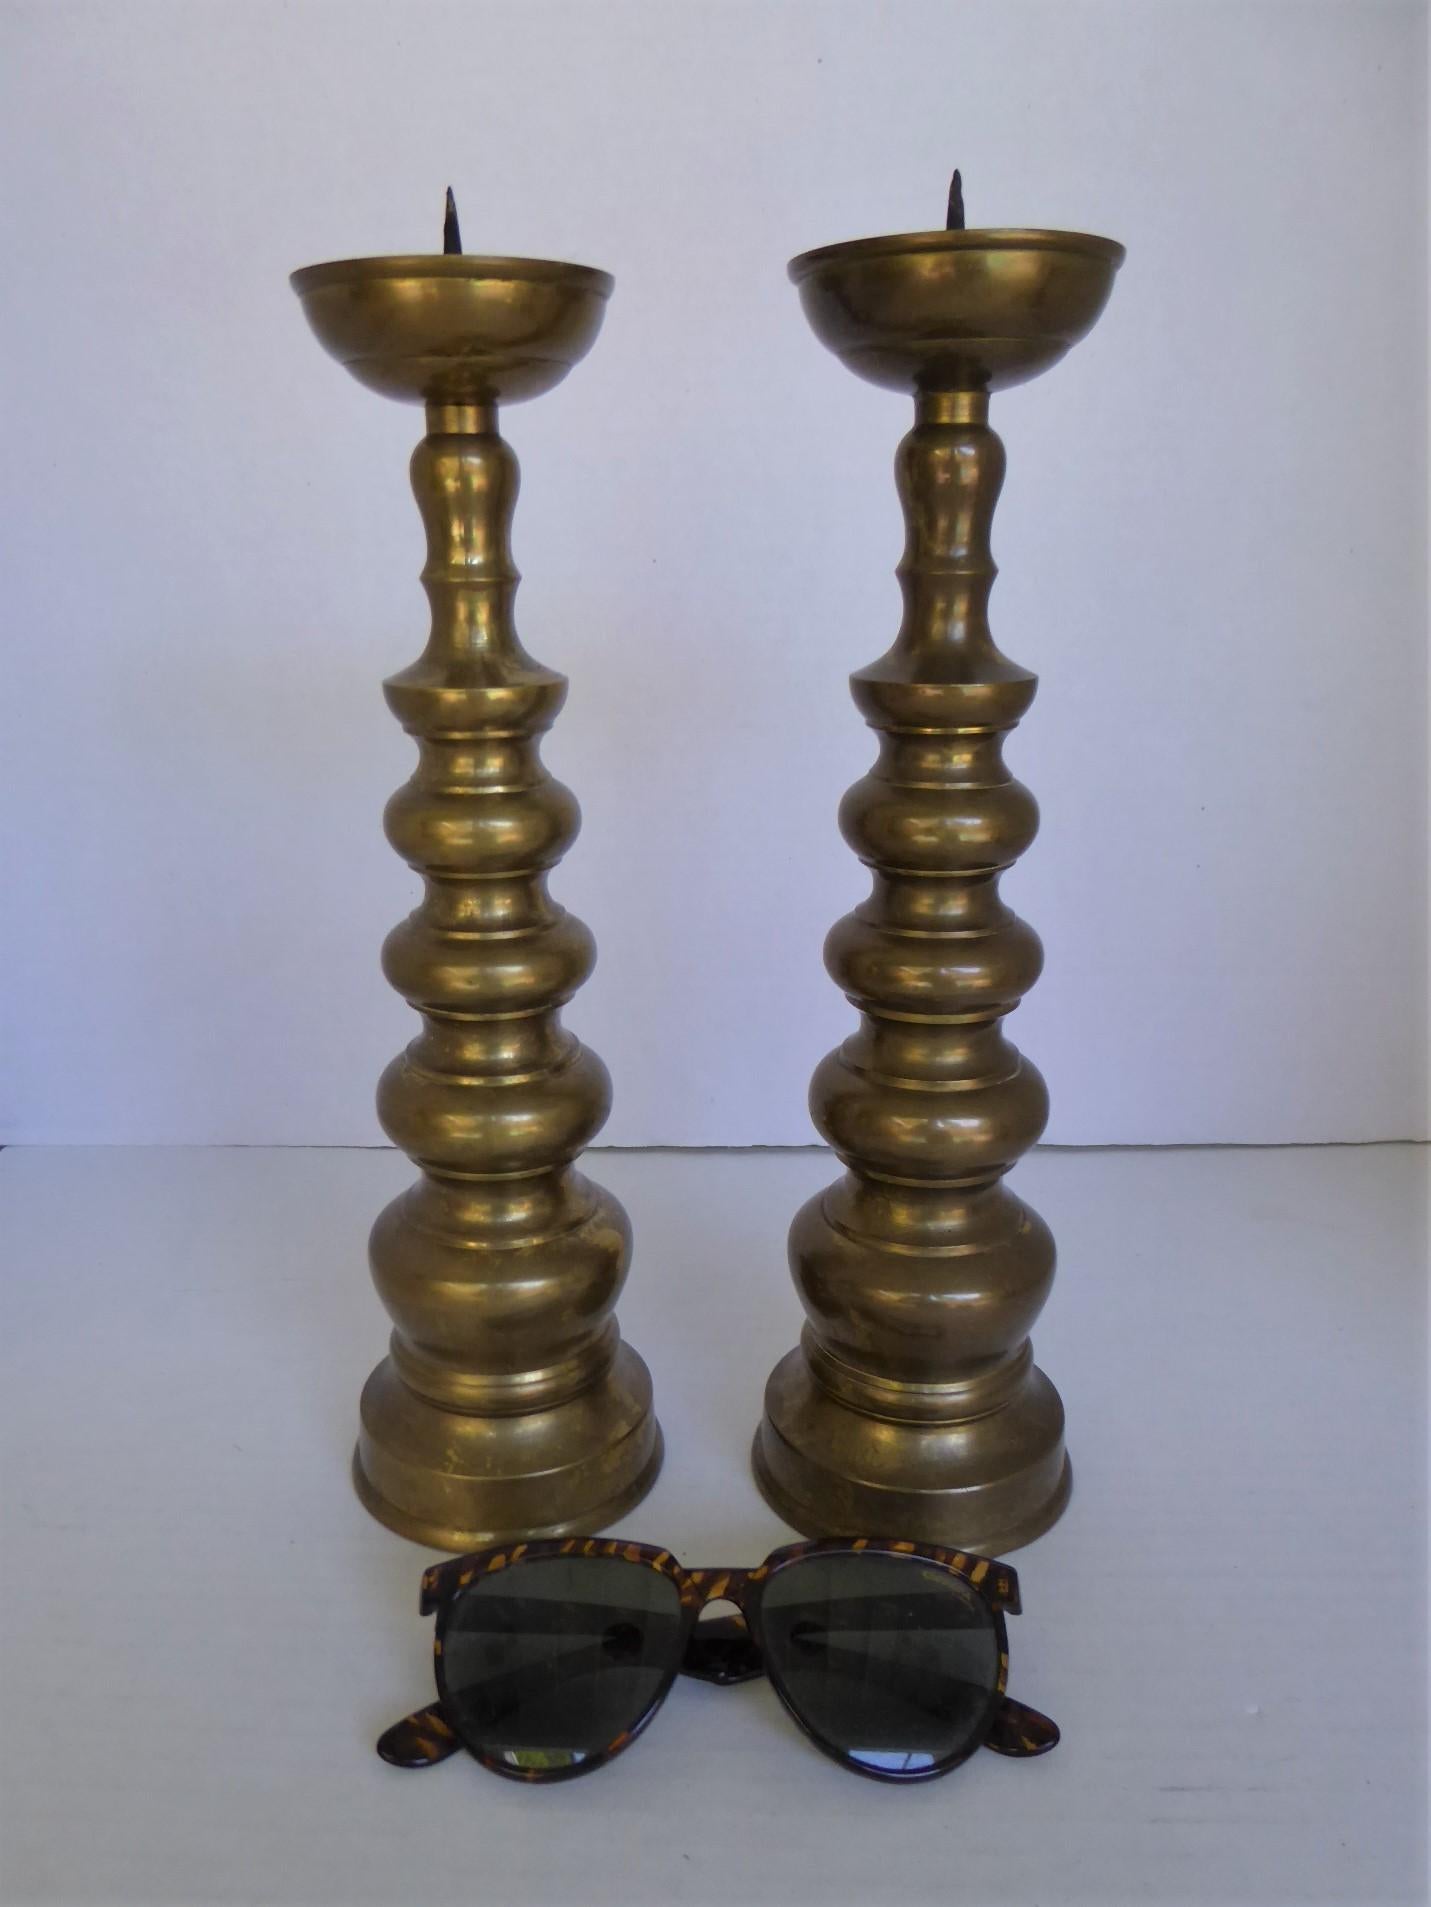 Probably from the 1960s, Brass Candle Prickets inspired by the altar candleholders used on shrines throughout Asia. Workmanship is very good in the manufacturing of the items, thus possibly made in Hong Kong.  Simple and modern design of decreasing